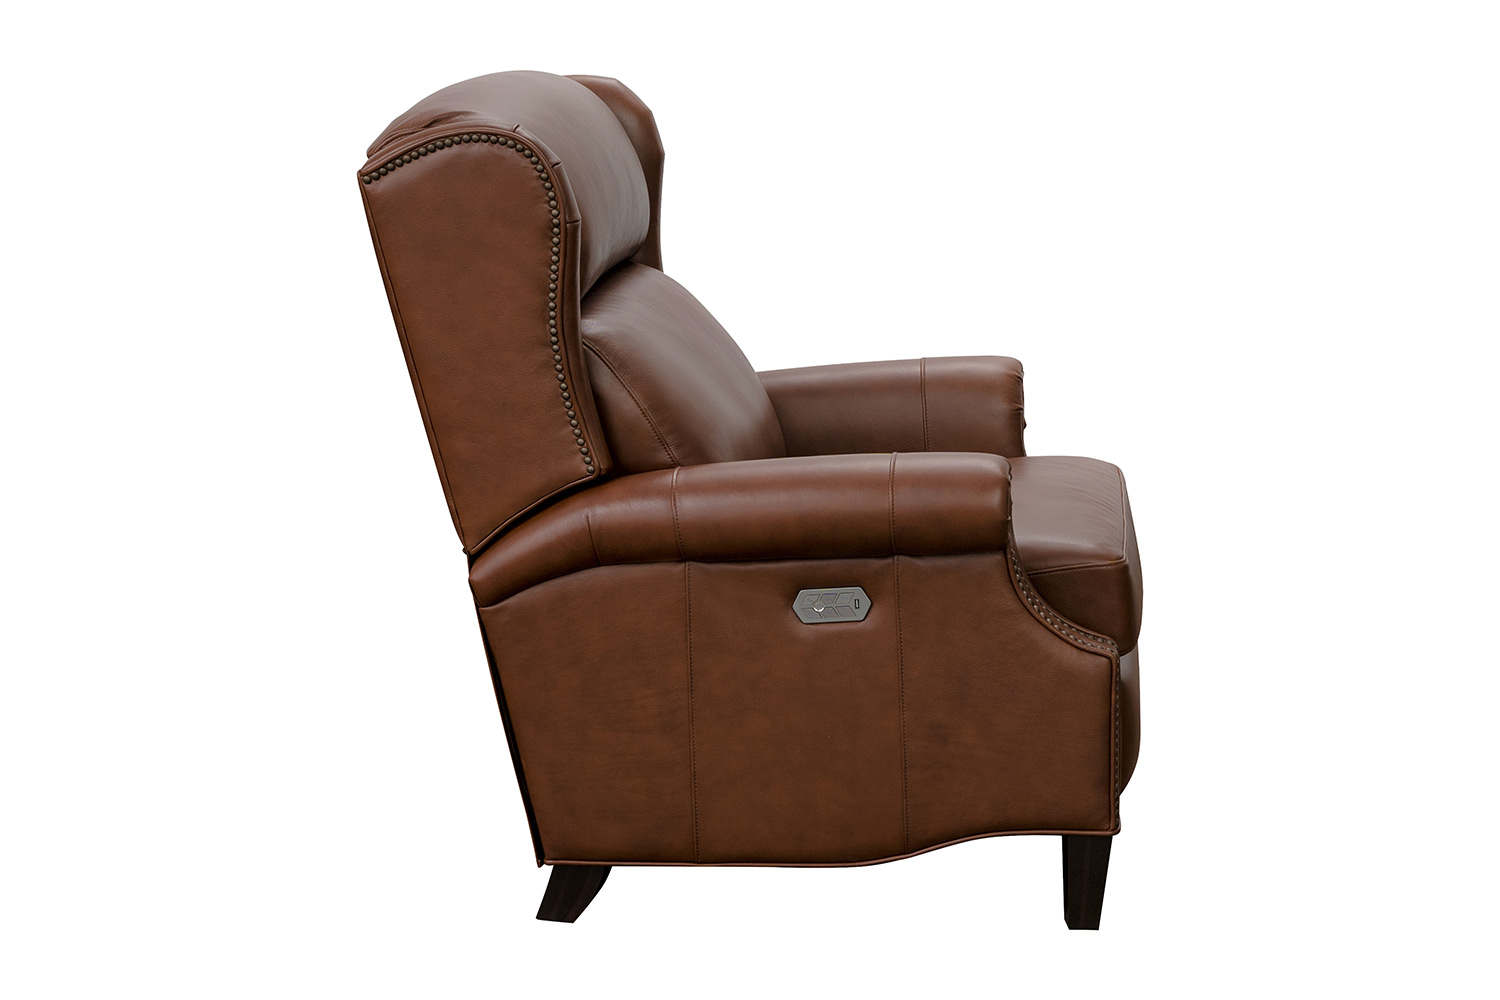 Barcalounger Philadelphia Power Recliner Chair with Power Head Rest and Lumbar - Ashford Bitters/All Leather